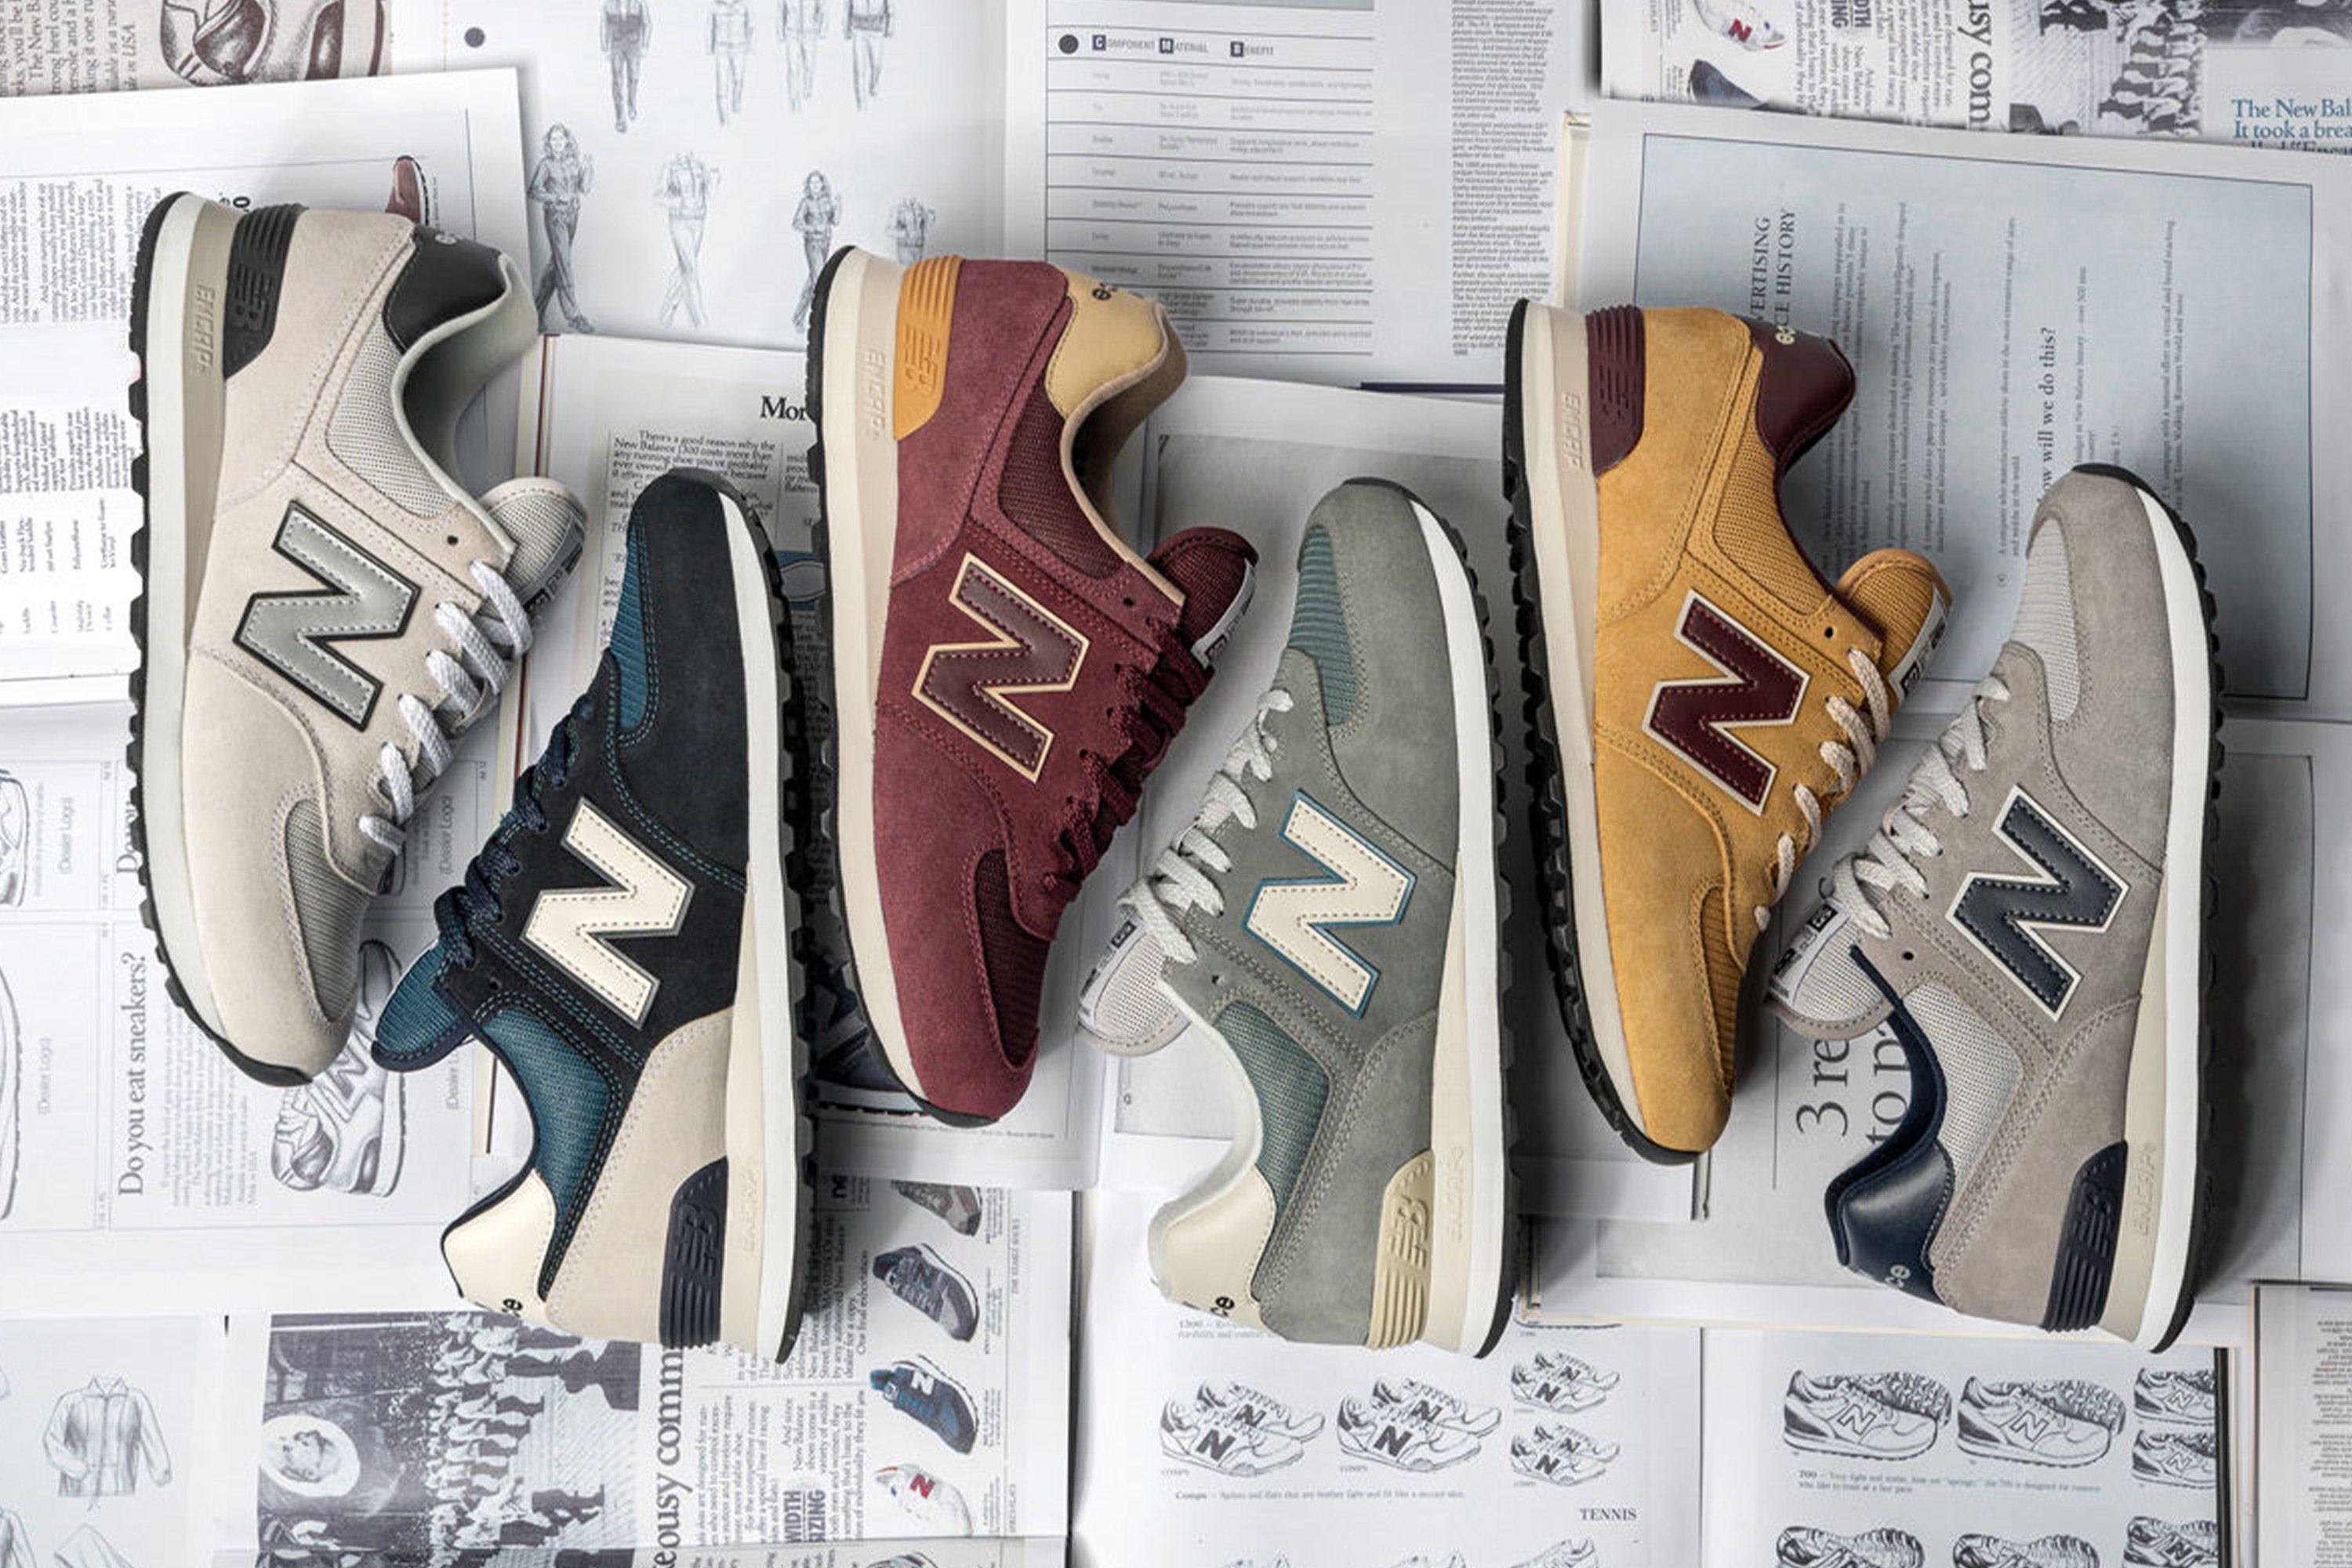 You Can't Knock a Classic: the New Balance 574, Reviewed